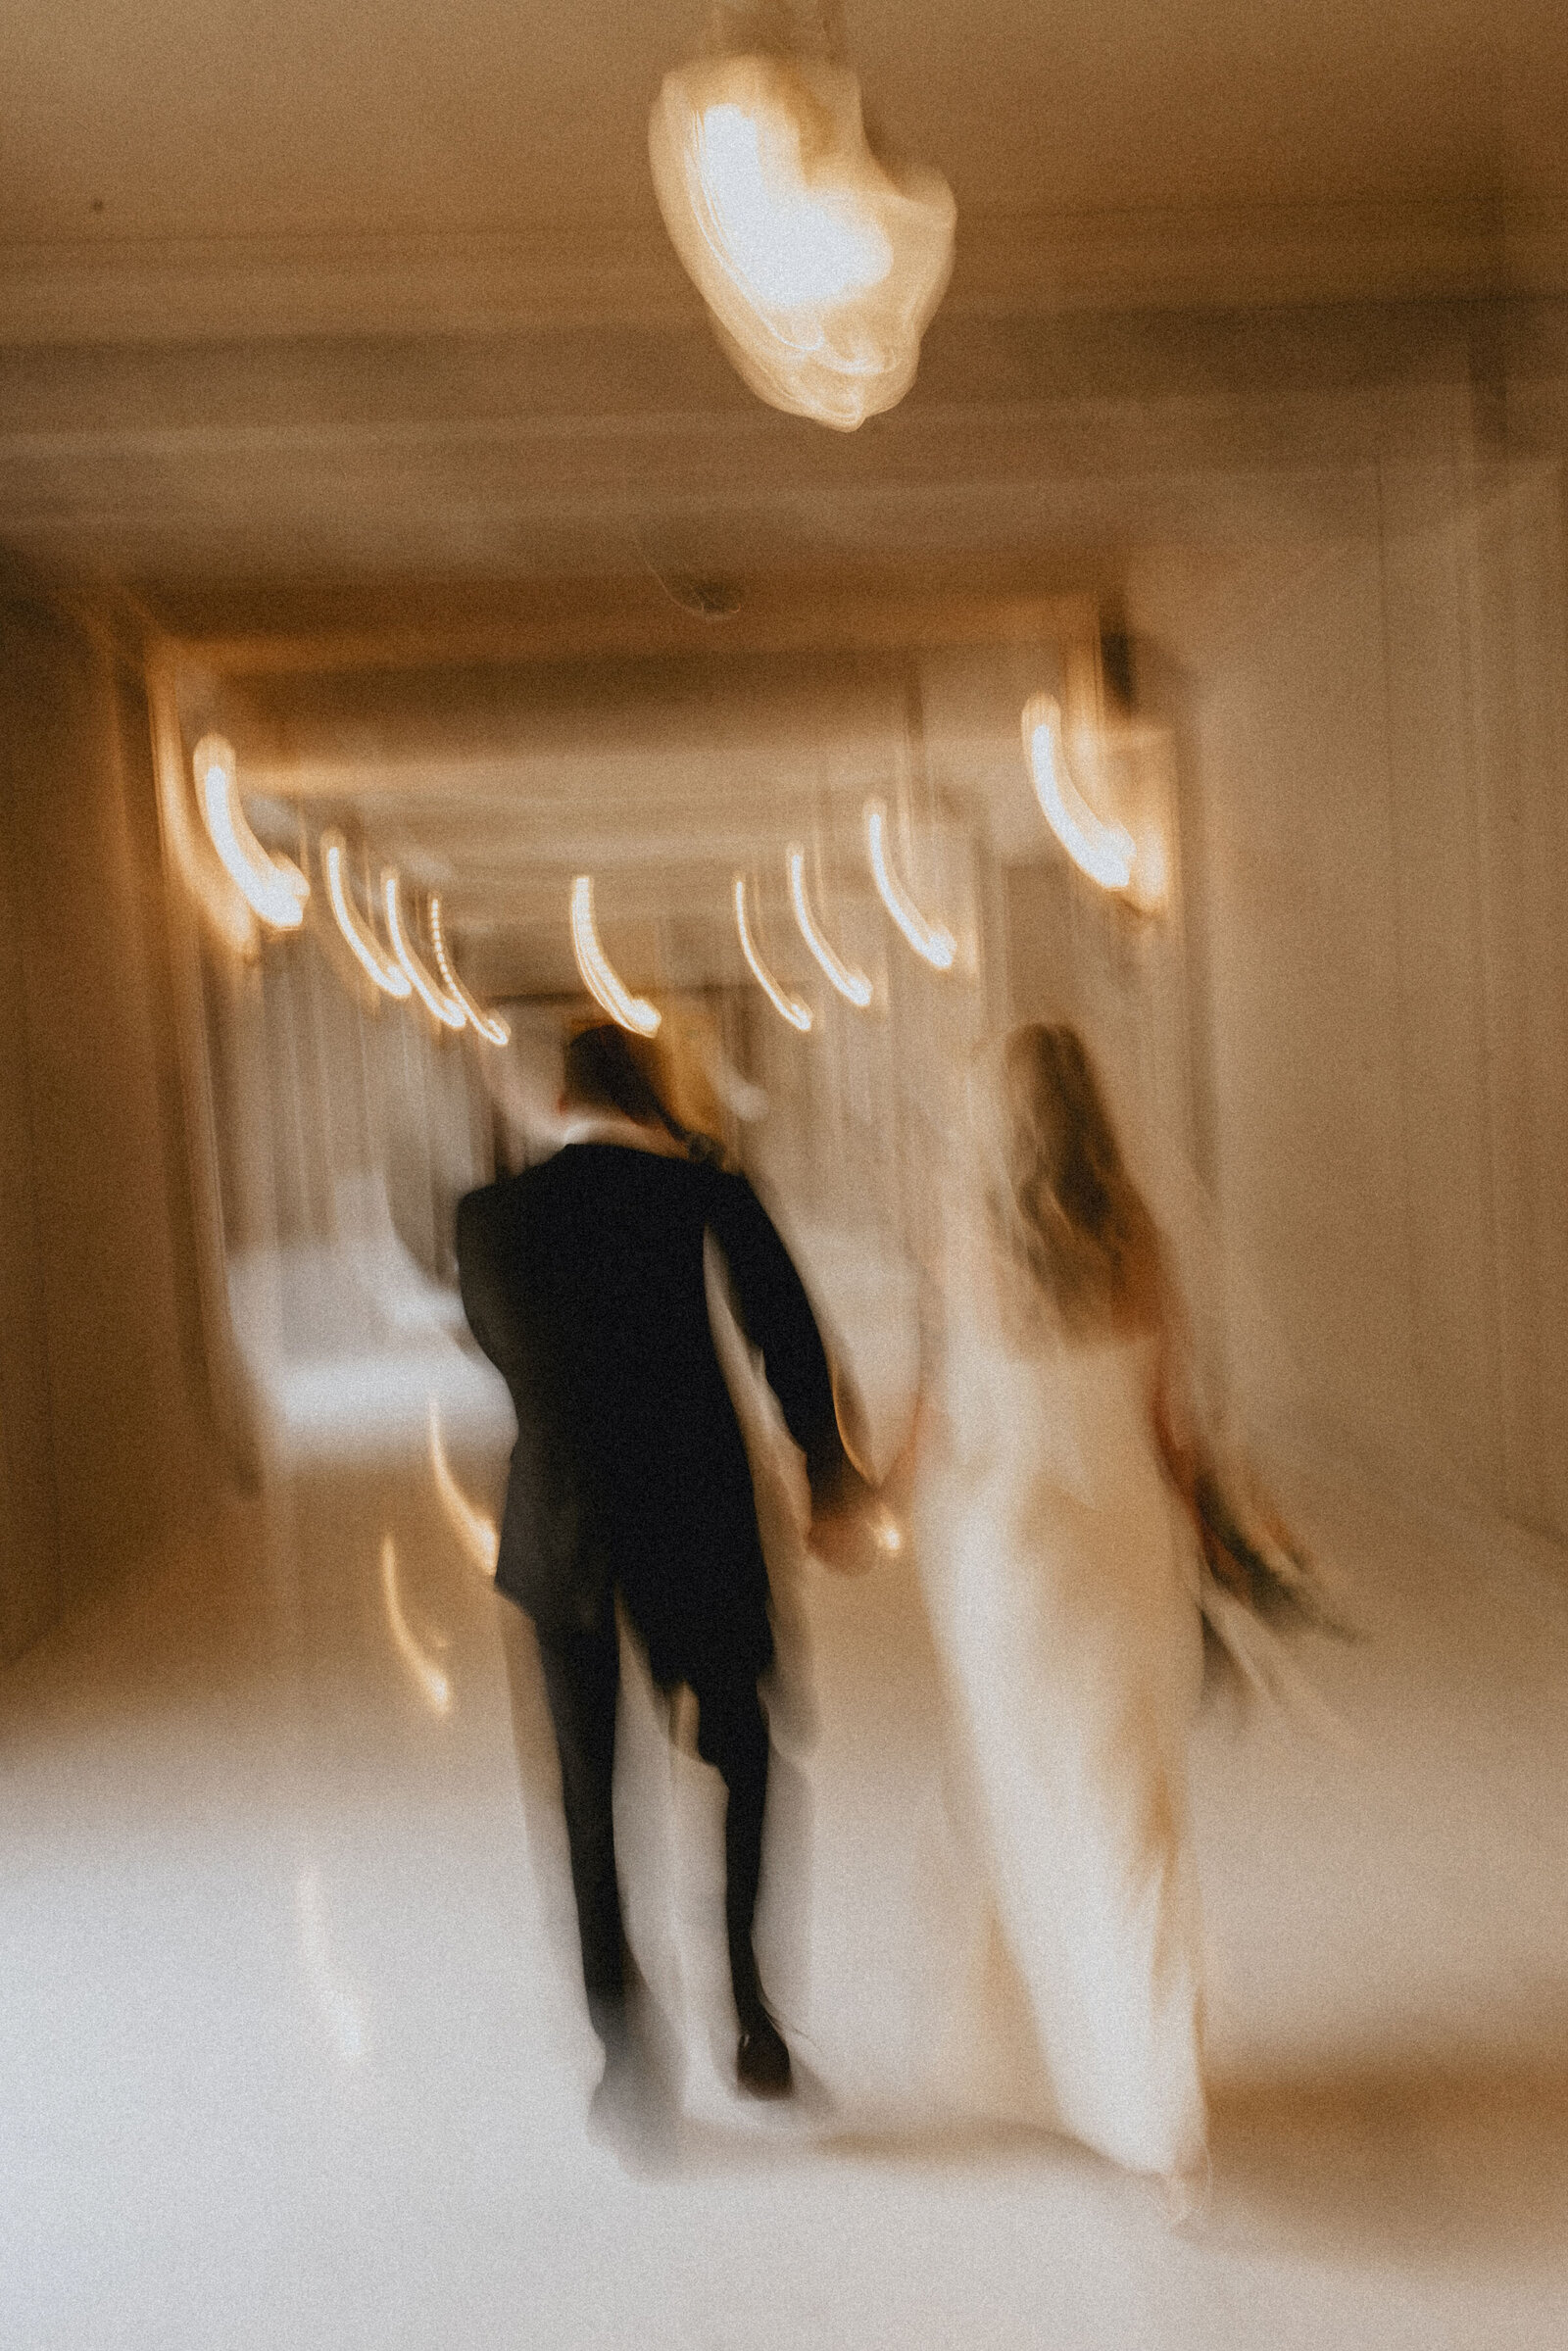 A bride and groom holding hands and walking down a warmly lit corridor in San Francisco City Hall, creating a dreamy effect with streaks of light from ceiling lamps.